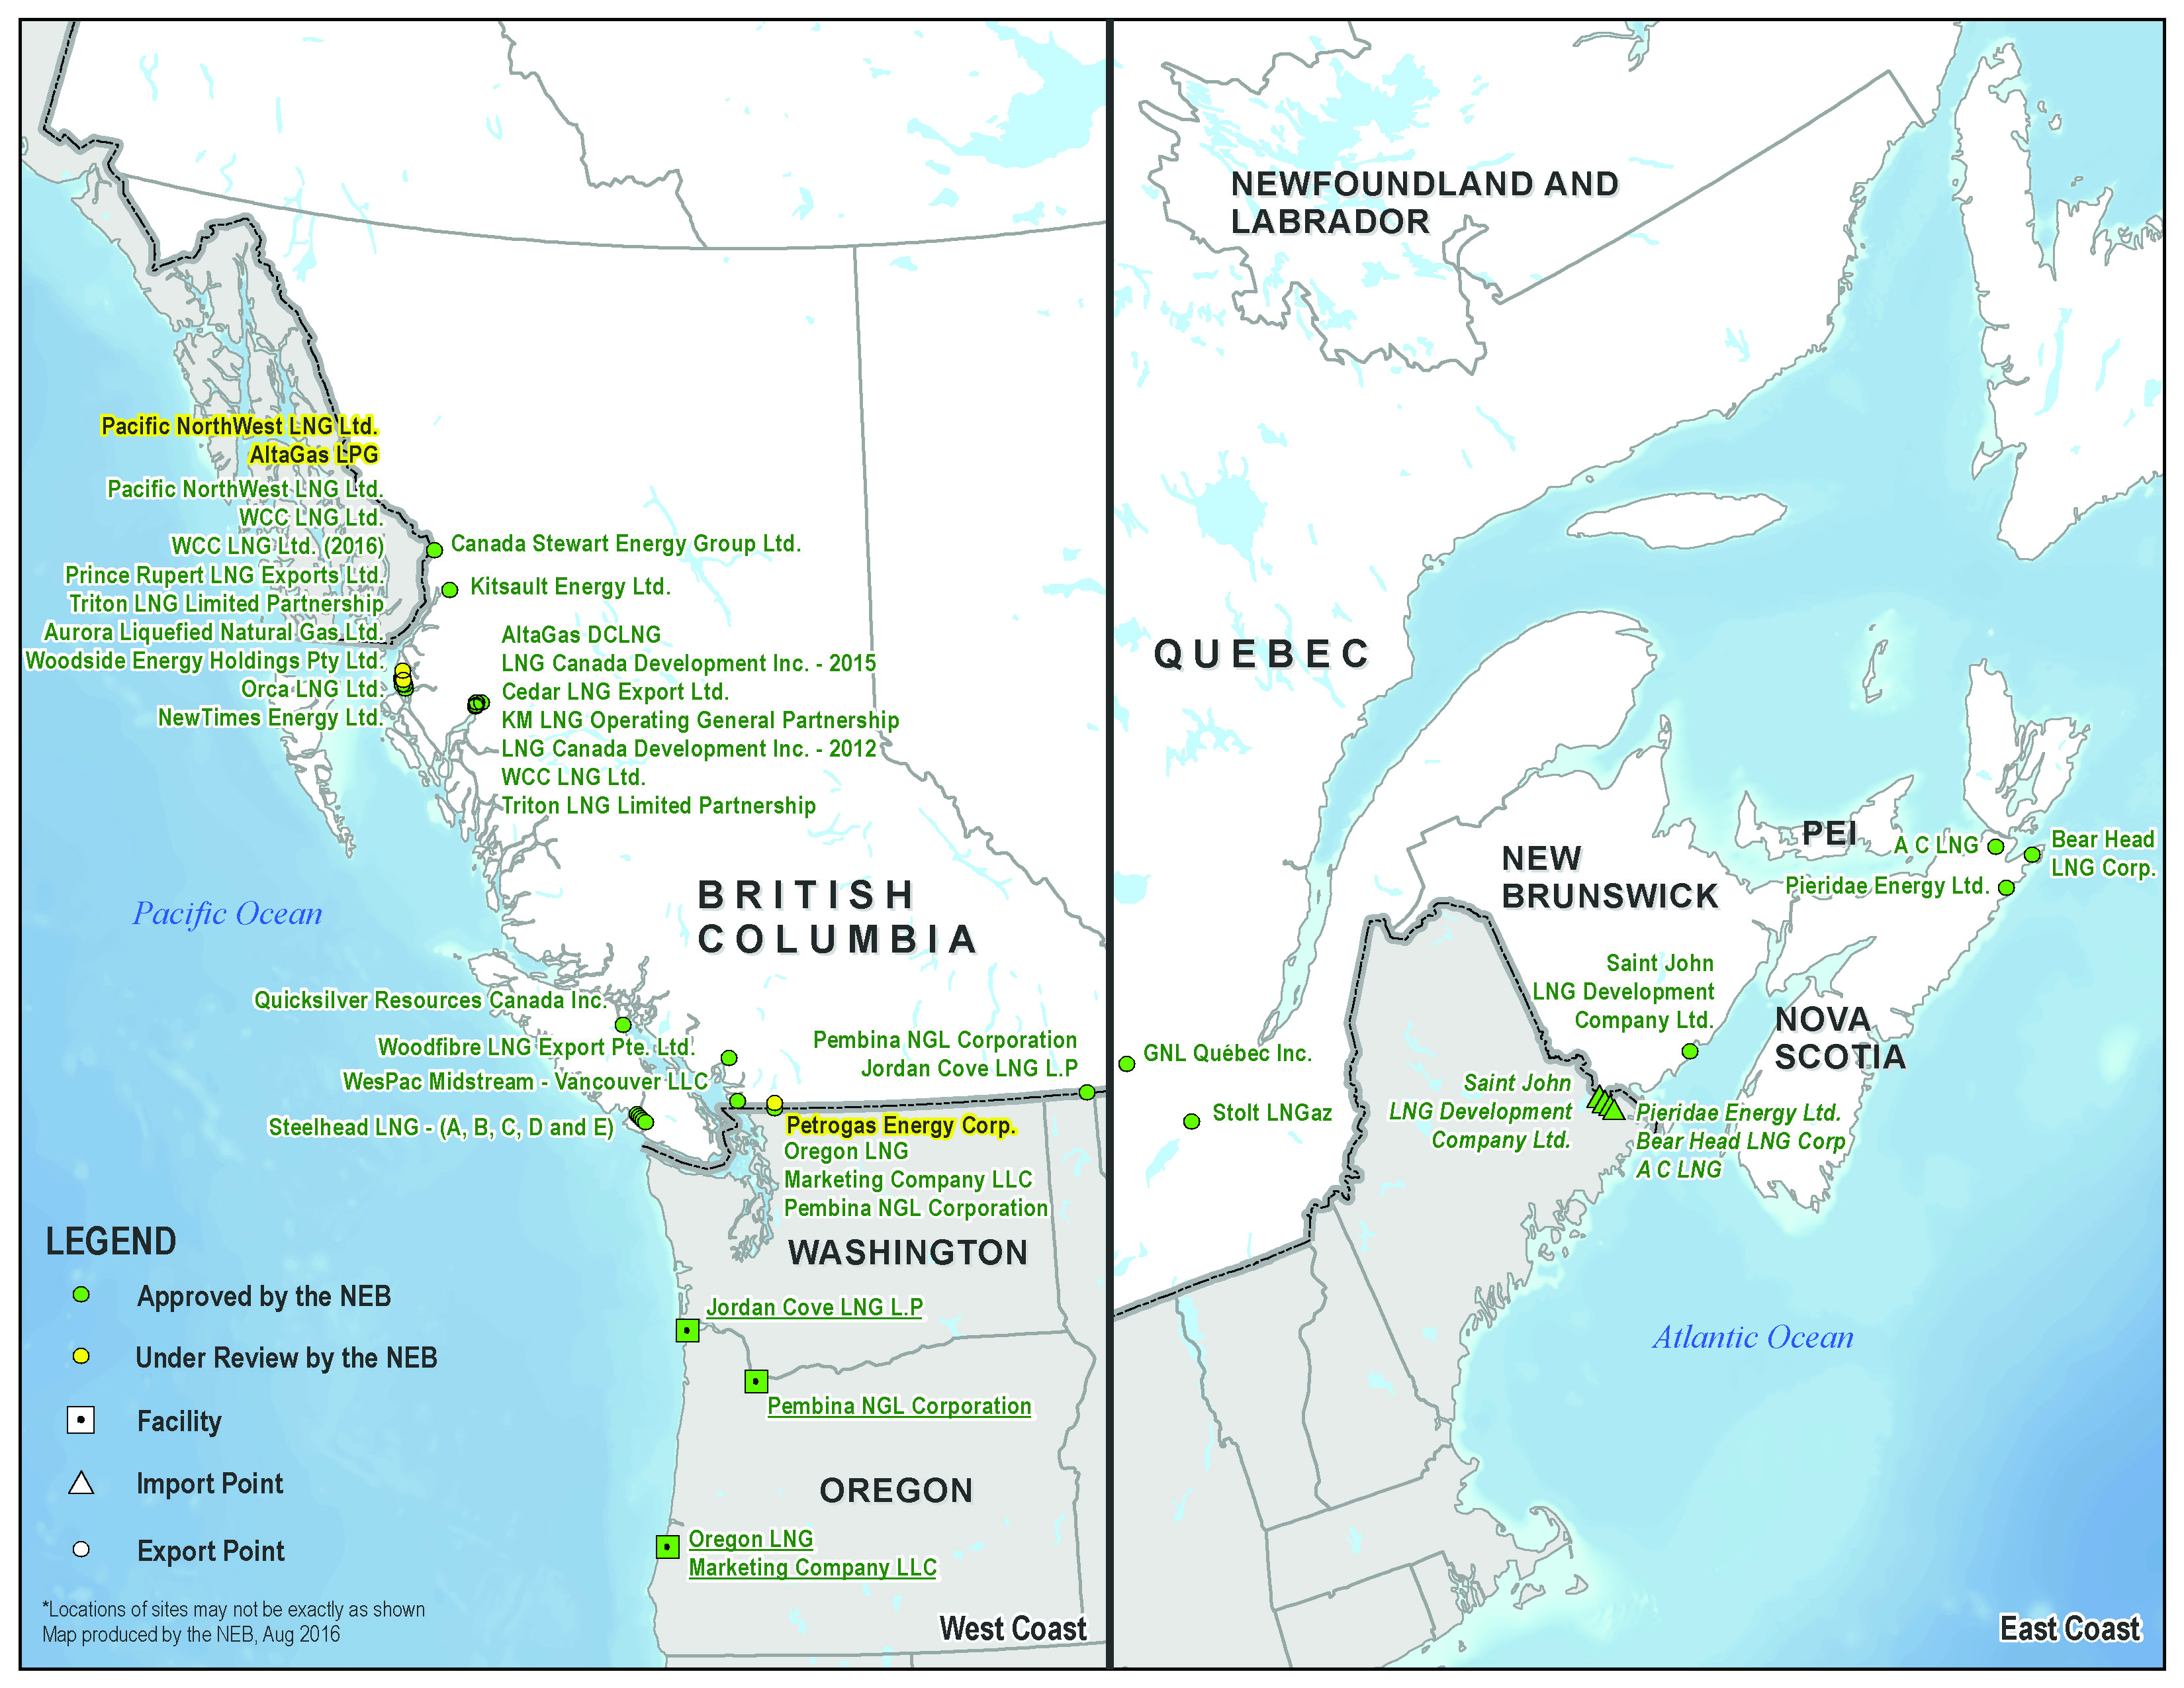 This geographic map shows the east and west coasts of Canada and the northern United States. It shows the locations of proposed facilities associated with licence applications that have been approved by the Board, as well as those under review. The majority of the facilities are located along the northern coast of British Columbia; a few are located on the southern coast and Vancouver Island. On the east coast of Canada, there are a few facilities in New Brunswick and northern Nova Scotia. There are also two projects being considered for Quebec.